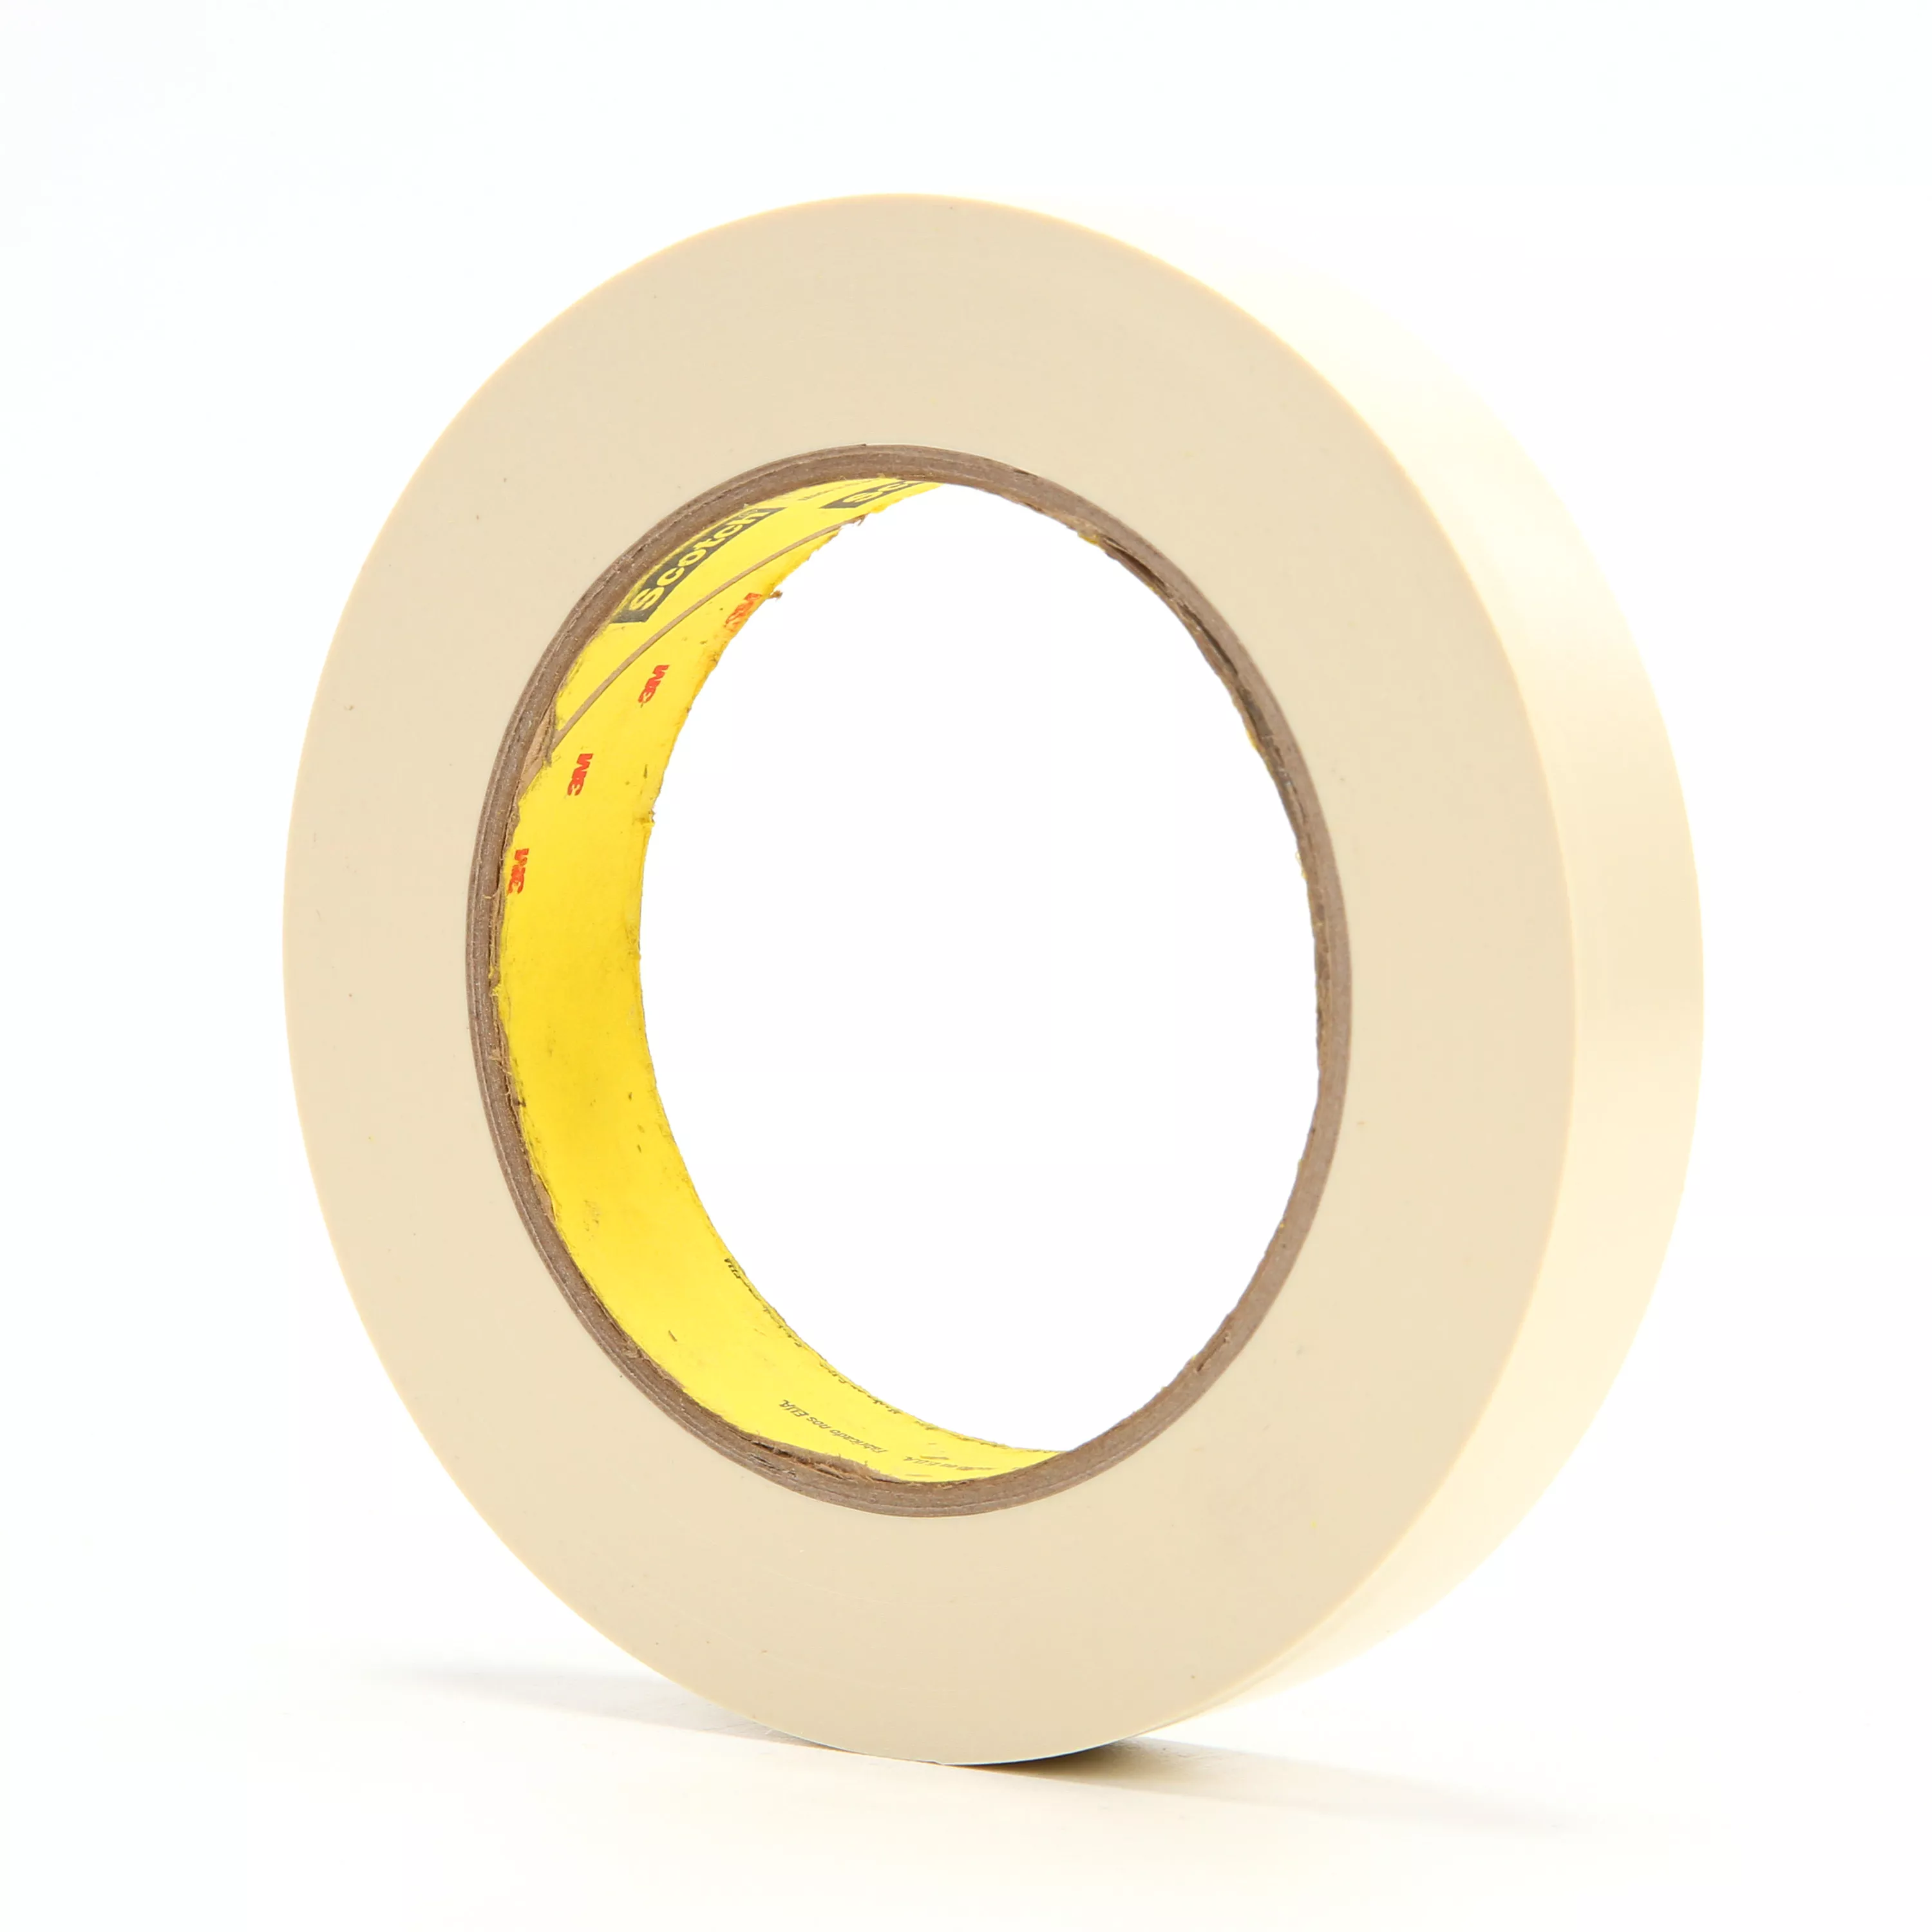 Product Number 470 | 3M™ Electroplating Tape 470